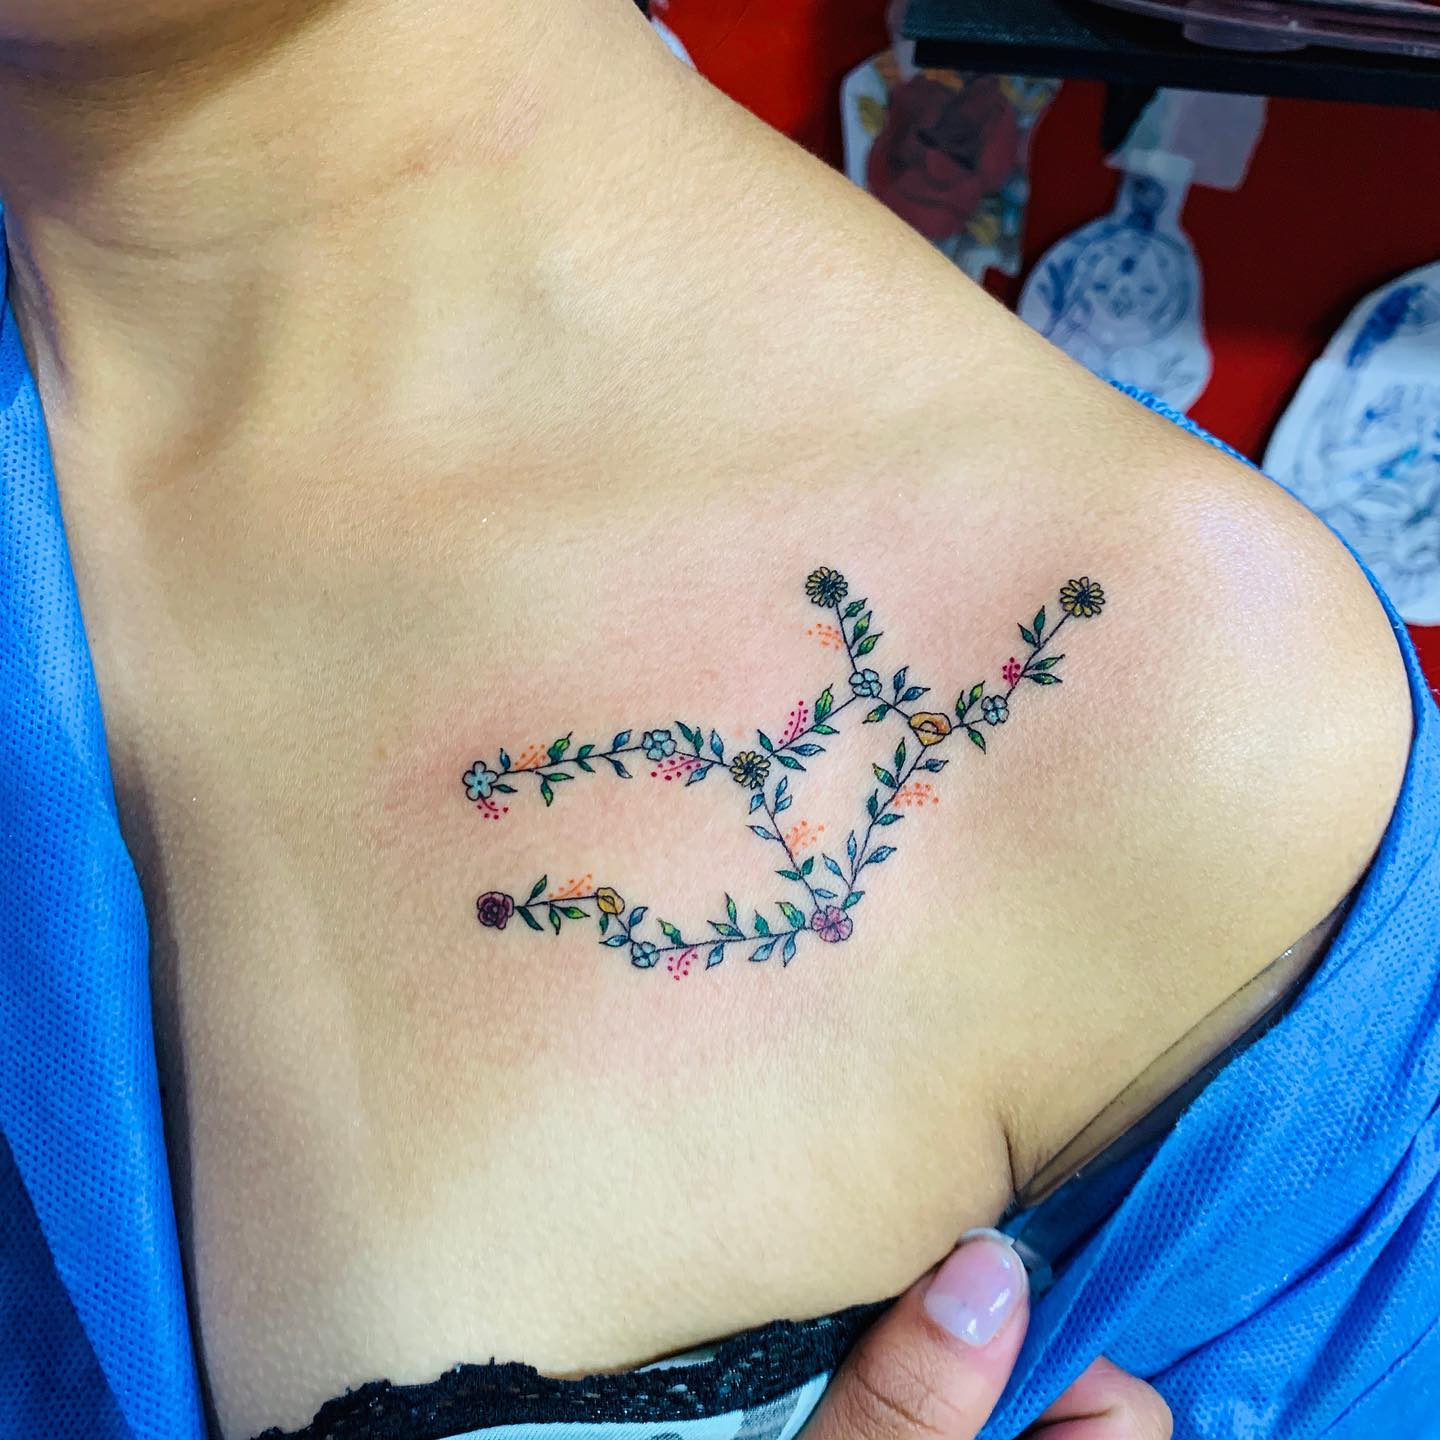 Floral tattoo designs have been always popular. The example above shows a perfect Virgo constellation with some flower decoration. Are you ready to rock?